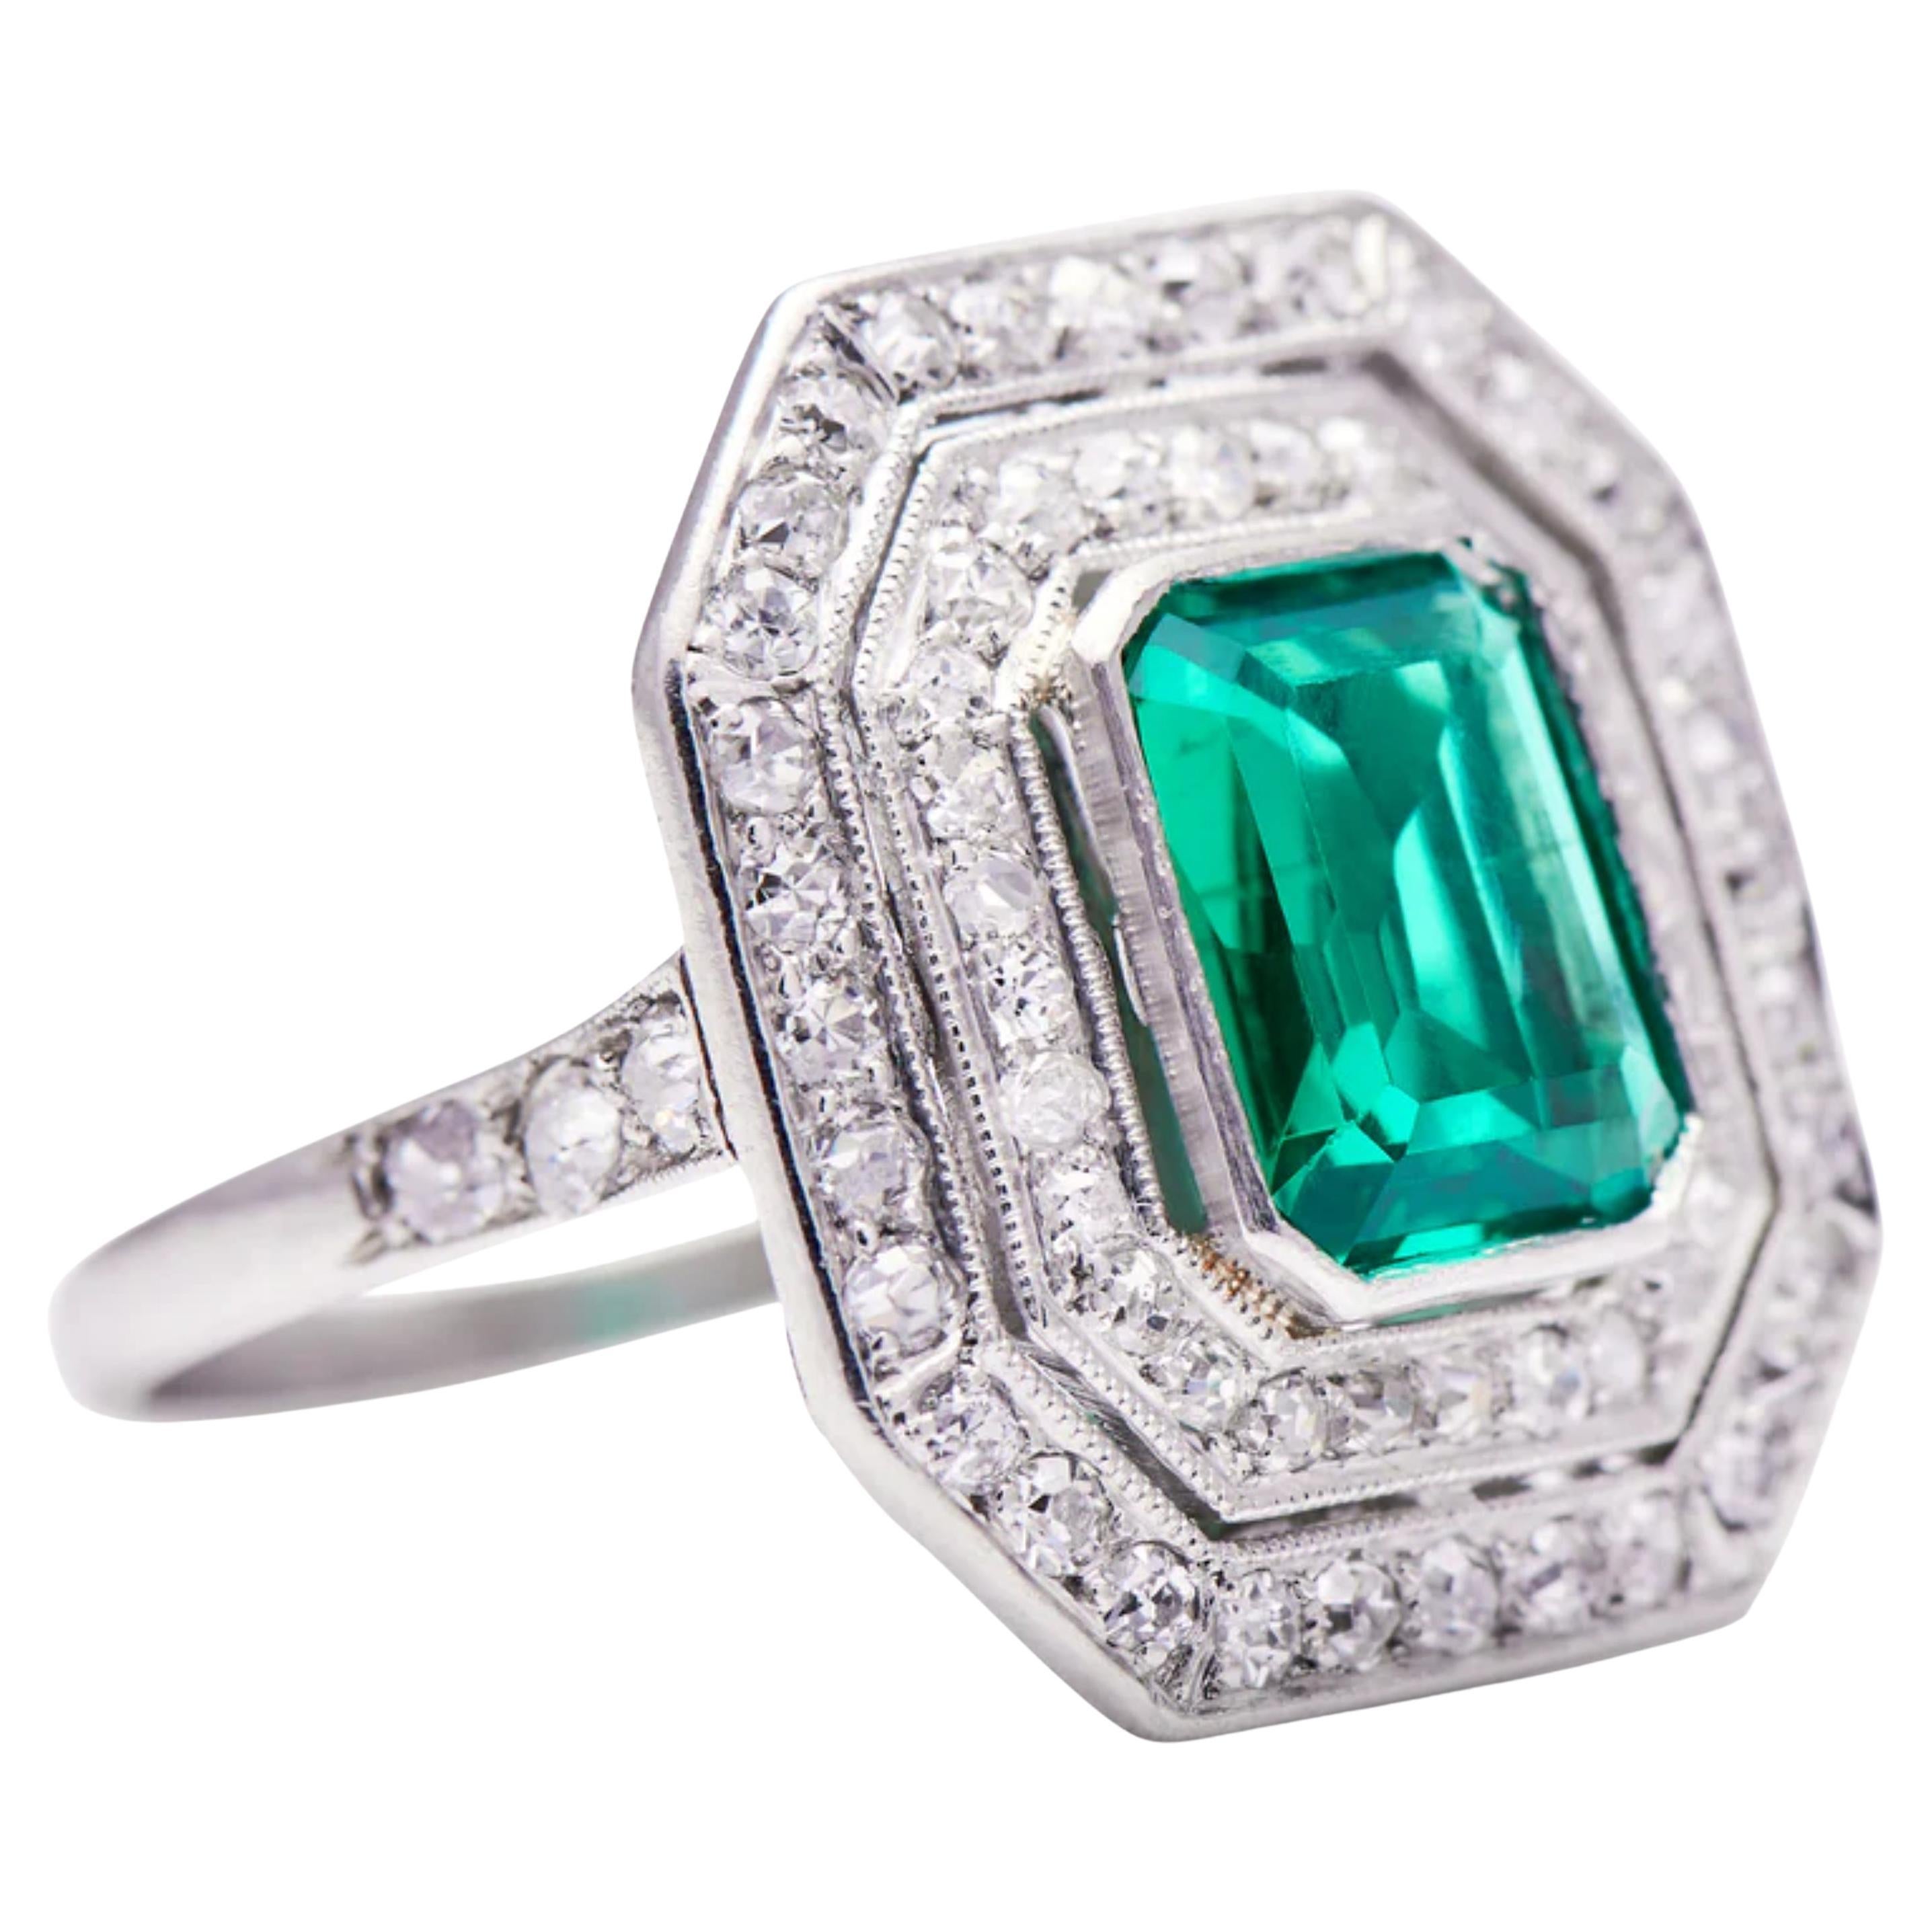 Certified 1.70 Carat Double Halo Emerald Diamond Engagement Ring in 18k Gold For Sale